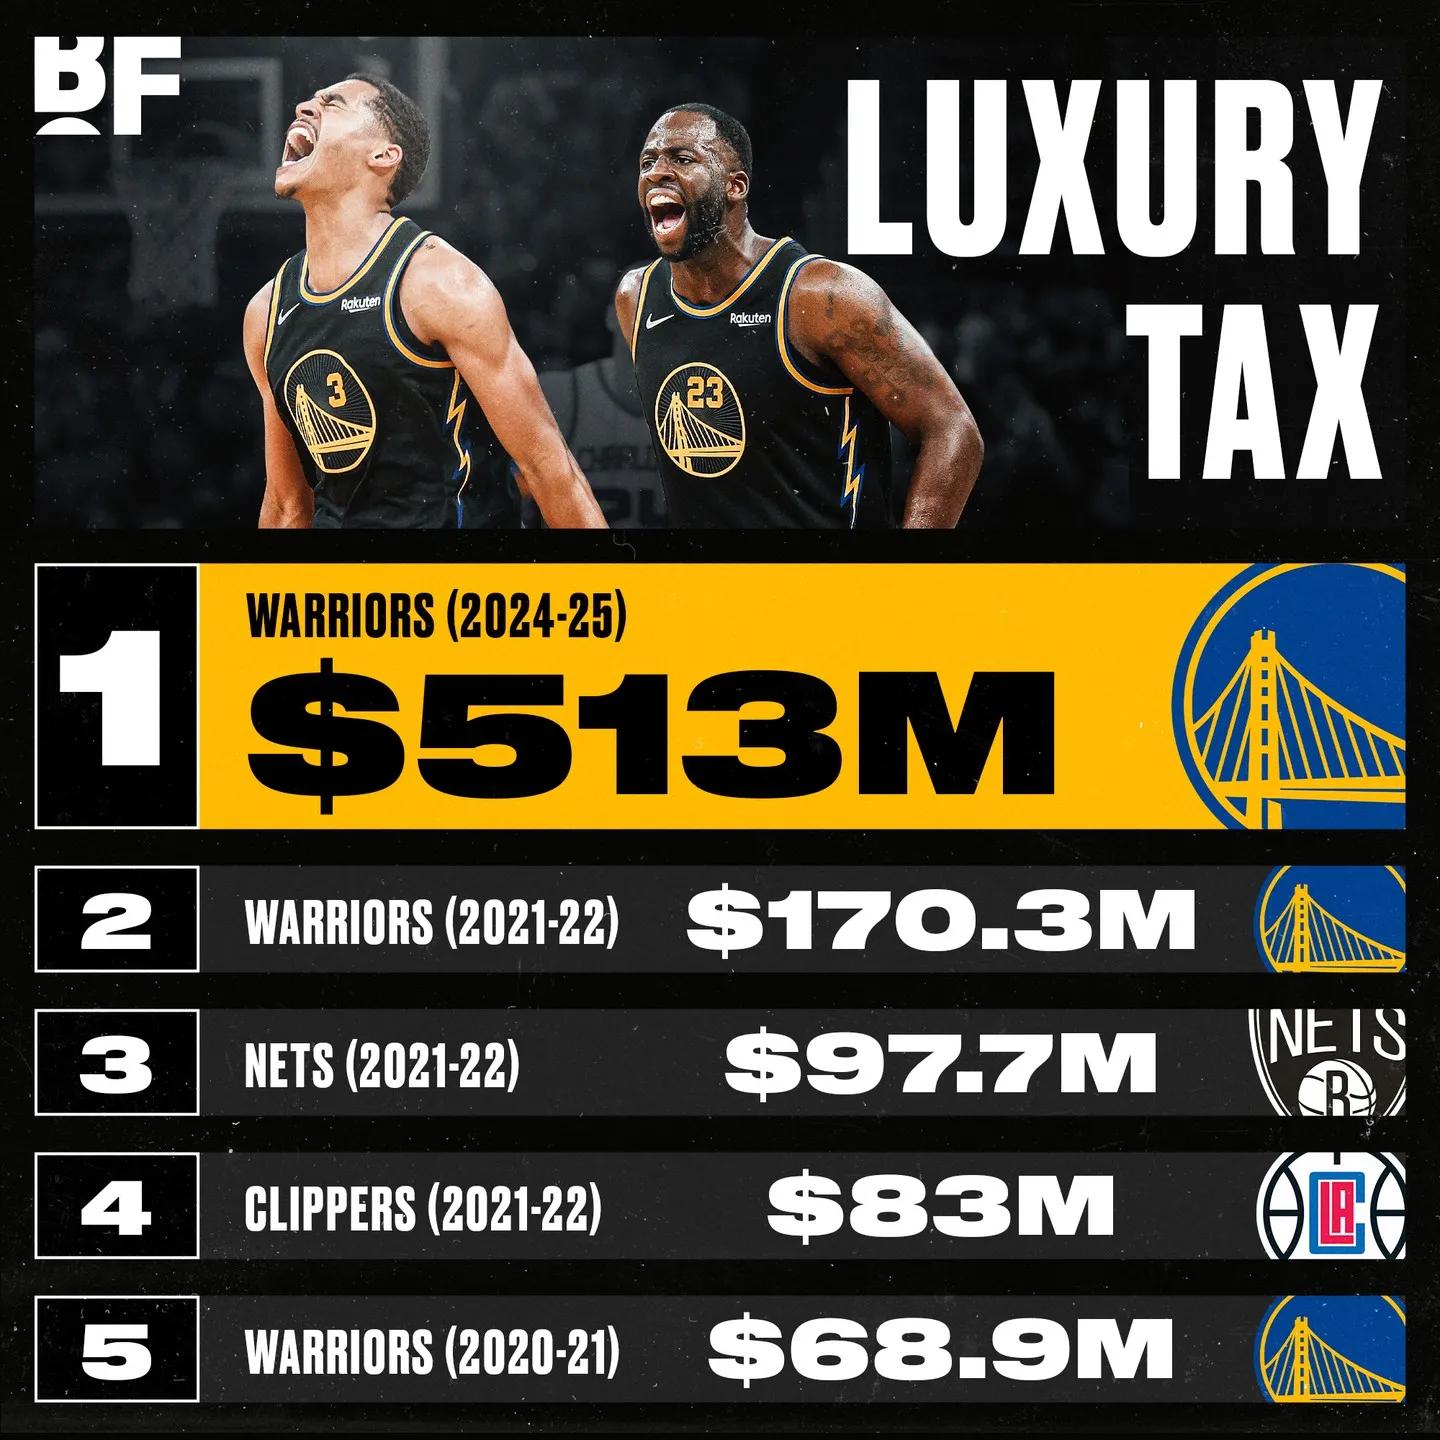 How high will the luxury tax be in the future after the Golden State